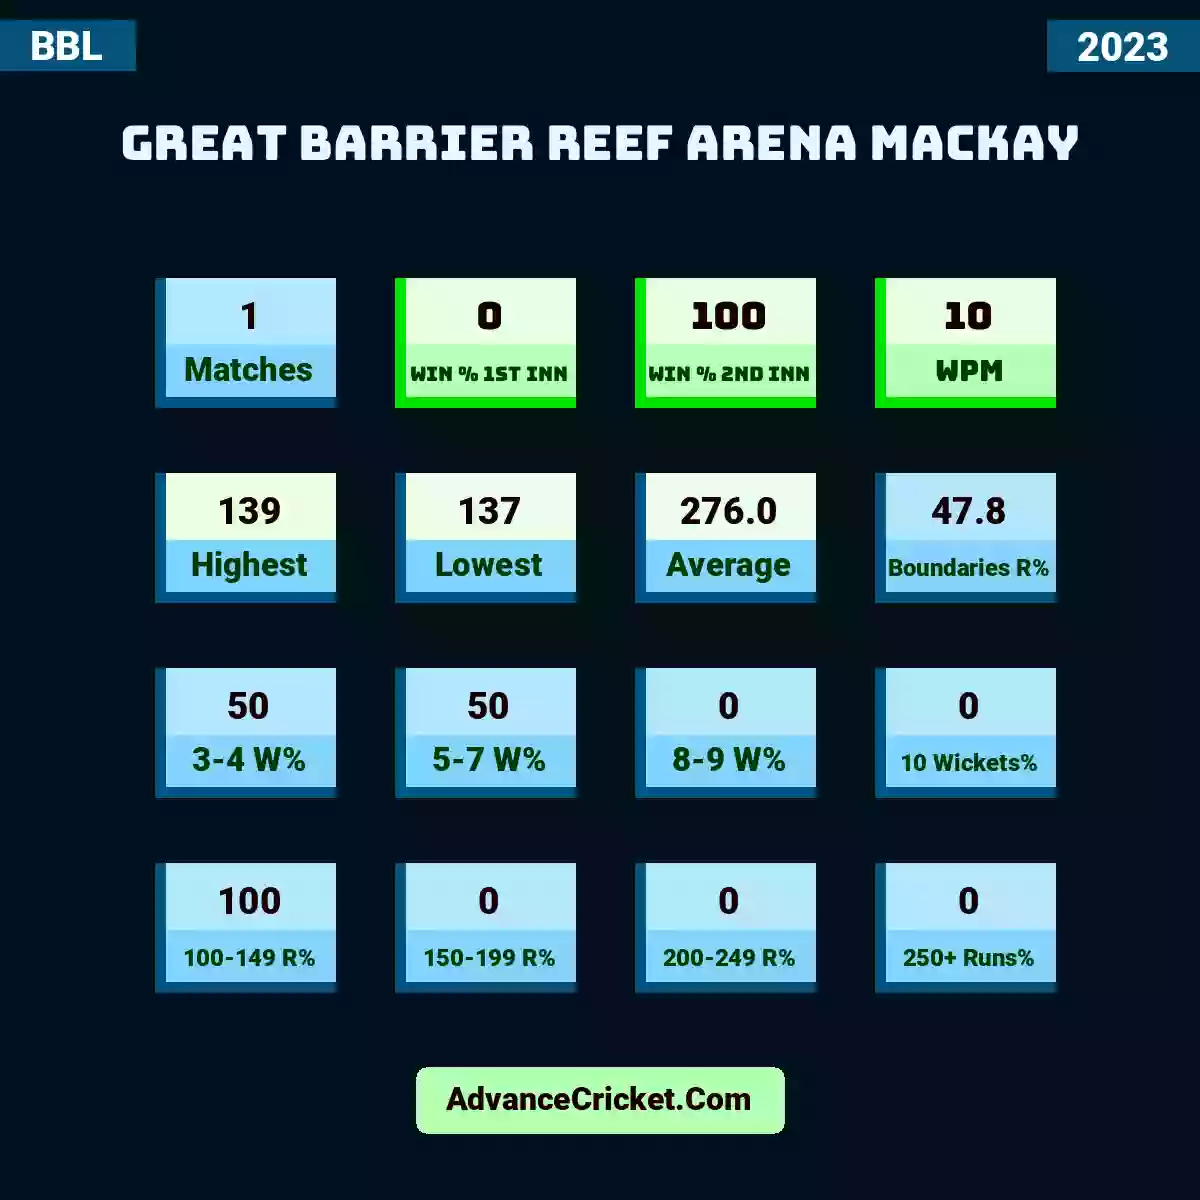 Image showing Great Barrier Reef Arena Mackay with Matches: 1, Win % 1st Inn: 0, Win % 2nd Inn: 100, WPM: 10, Highest: 139, Lowest: 137, Average: 276.0, Boundaries R%: 47.8, 3-4 W%: 50, 5-7 W%: 50, 8-9 W%: 0, 10 Wickets%: 0, 100-149 R%: 100, 150-199 R%: 0, 200-249 R%: 0, 250+ Runs%: 0.